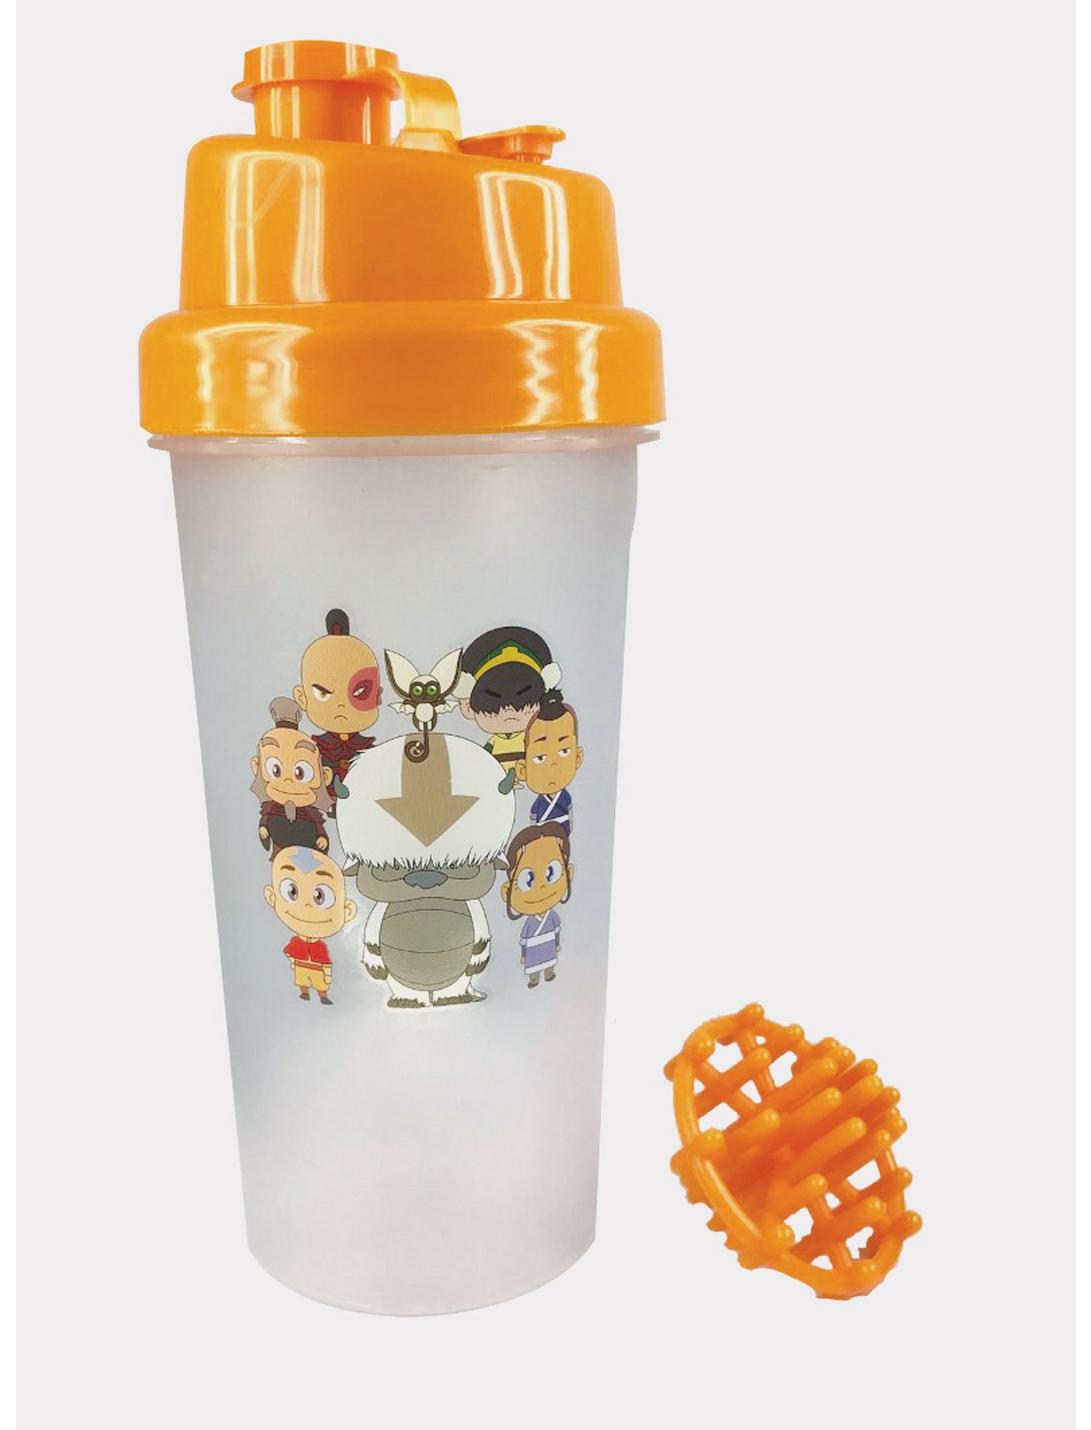 Avatar: The Airbender Chibi Characters Shaker Bottle